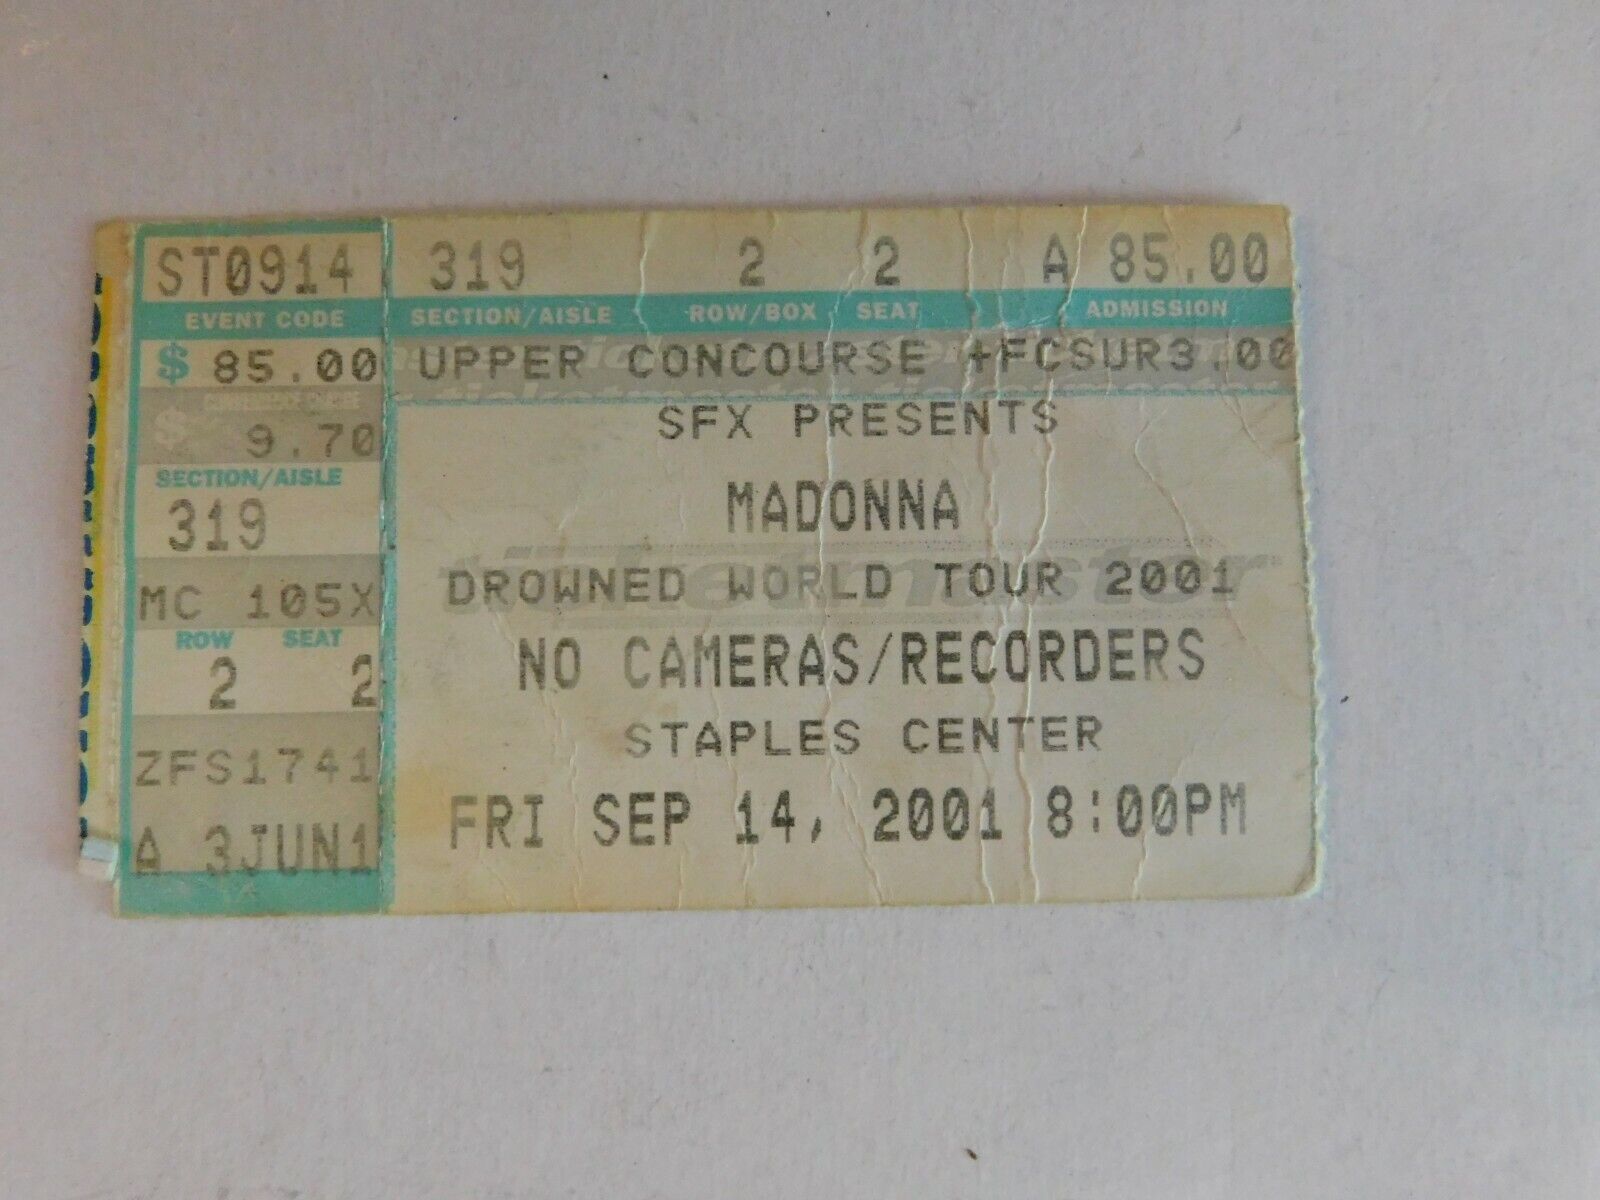 Madonna Concert Ticket Drowned World Tour 2001 Staples Center Los Angeles Mb2